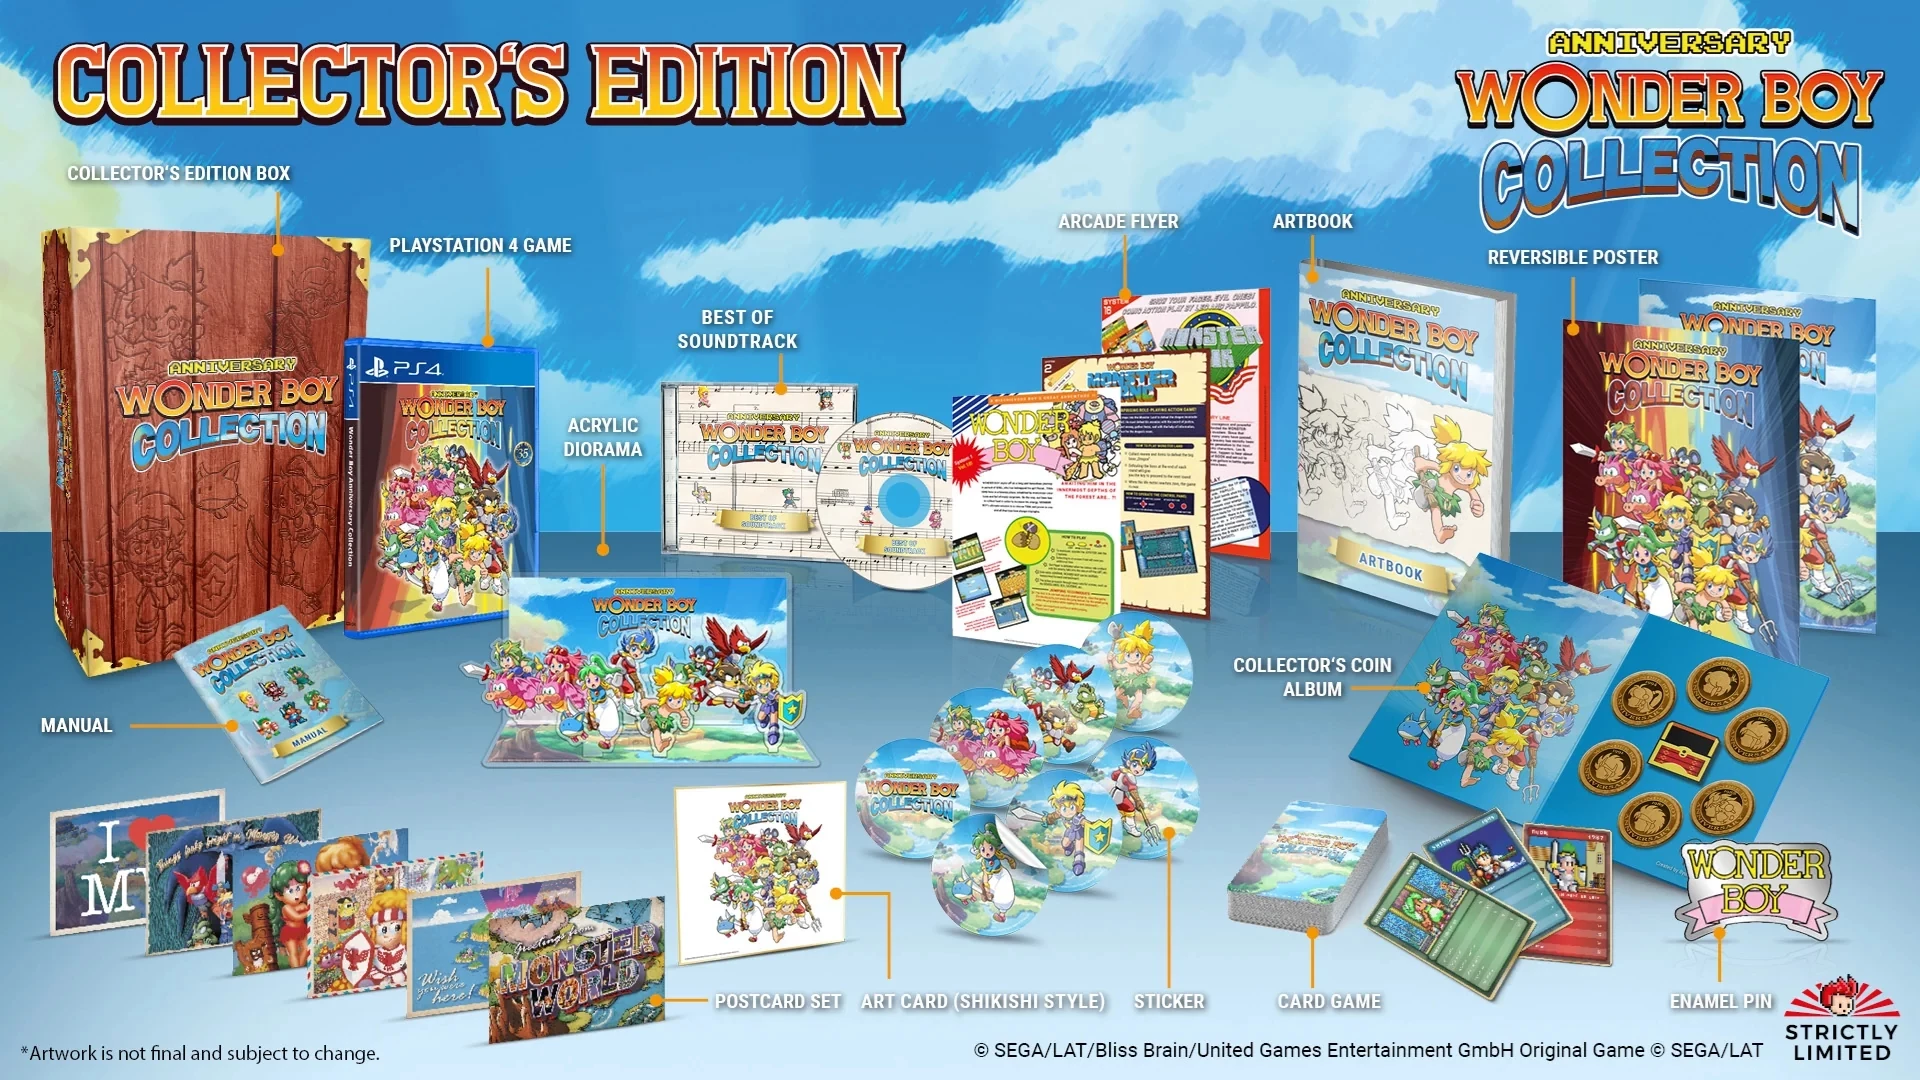 Wonder Boy: Anniversary Collection - Collector's Edition (Strictly Limited) (PS4), ININ Games, Strictly Limited Gamed